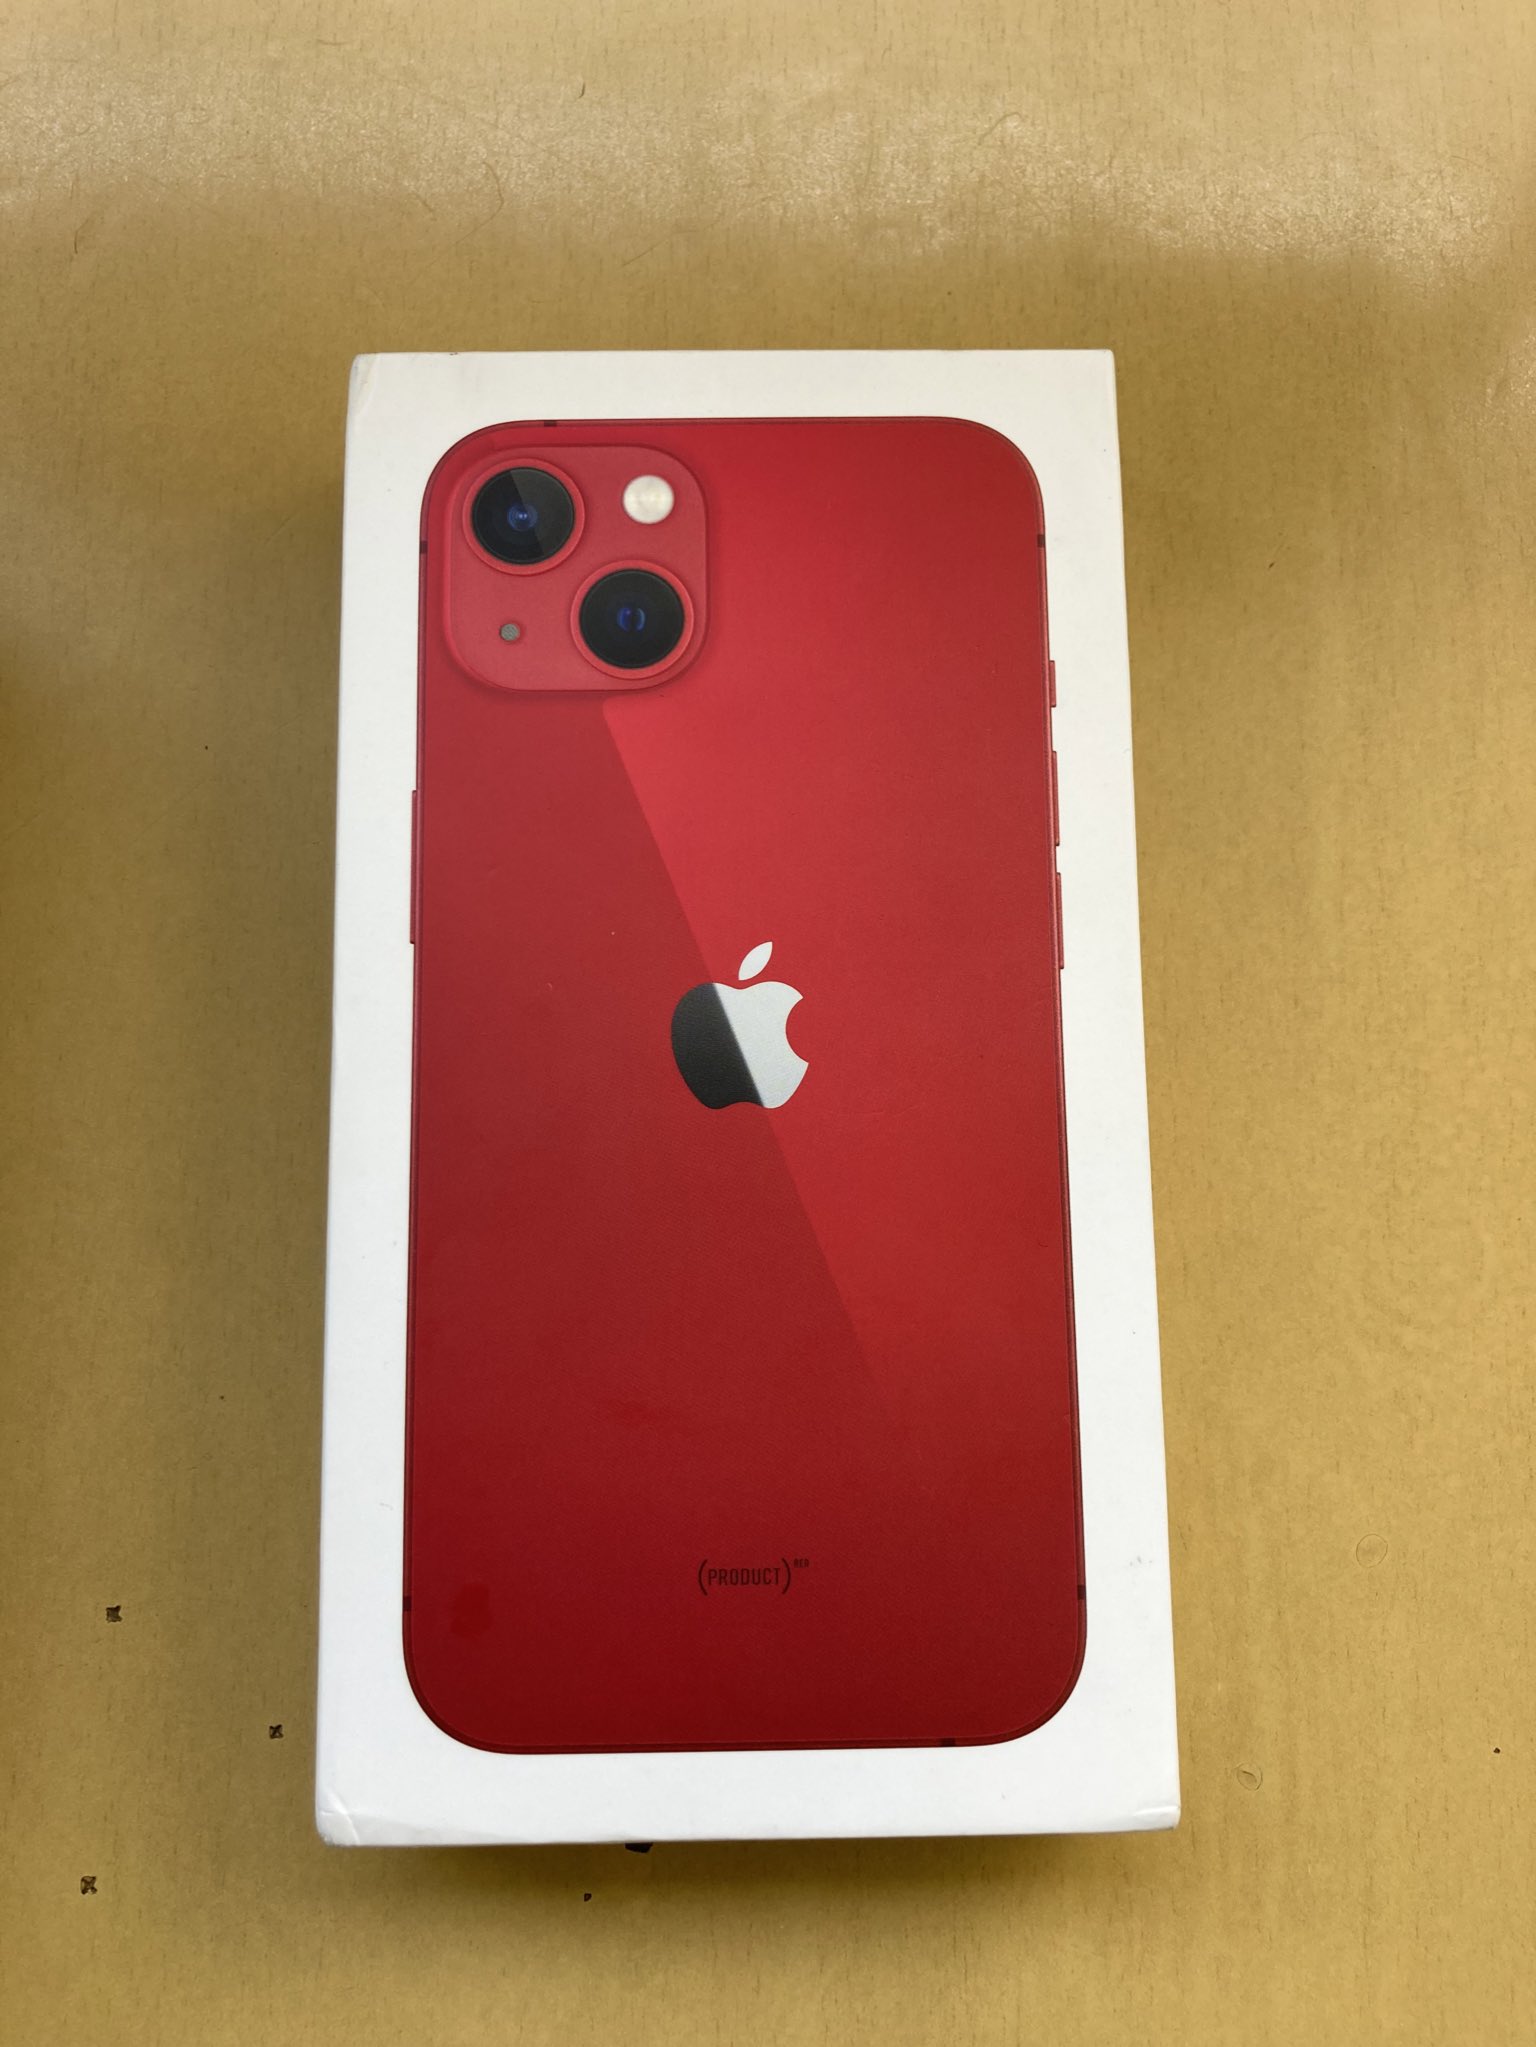 MobiTrade Technologies on X: New iPhone 13 256GB Factory Unlocked Red  Available GH₵ 6,600 ————————————— Contact 📞 : 0544395924/0205776218 DM to  purchase or make enquiries ————————————— #MobiFix #iOS #Apple #Macbook # iPhone #iTech #